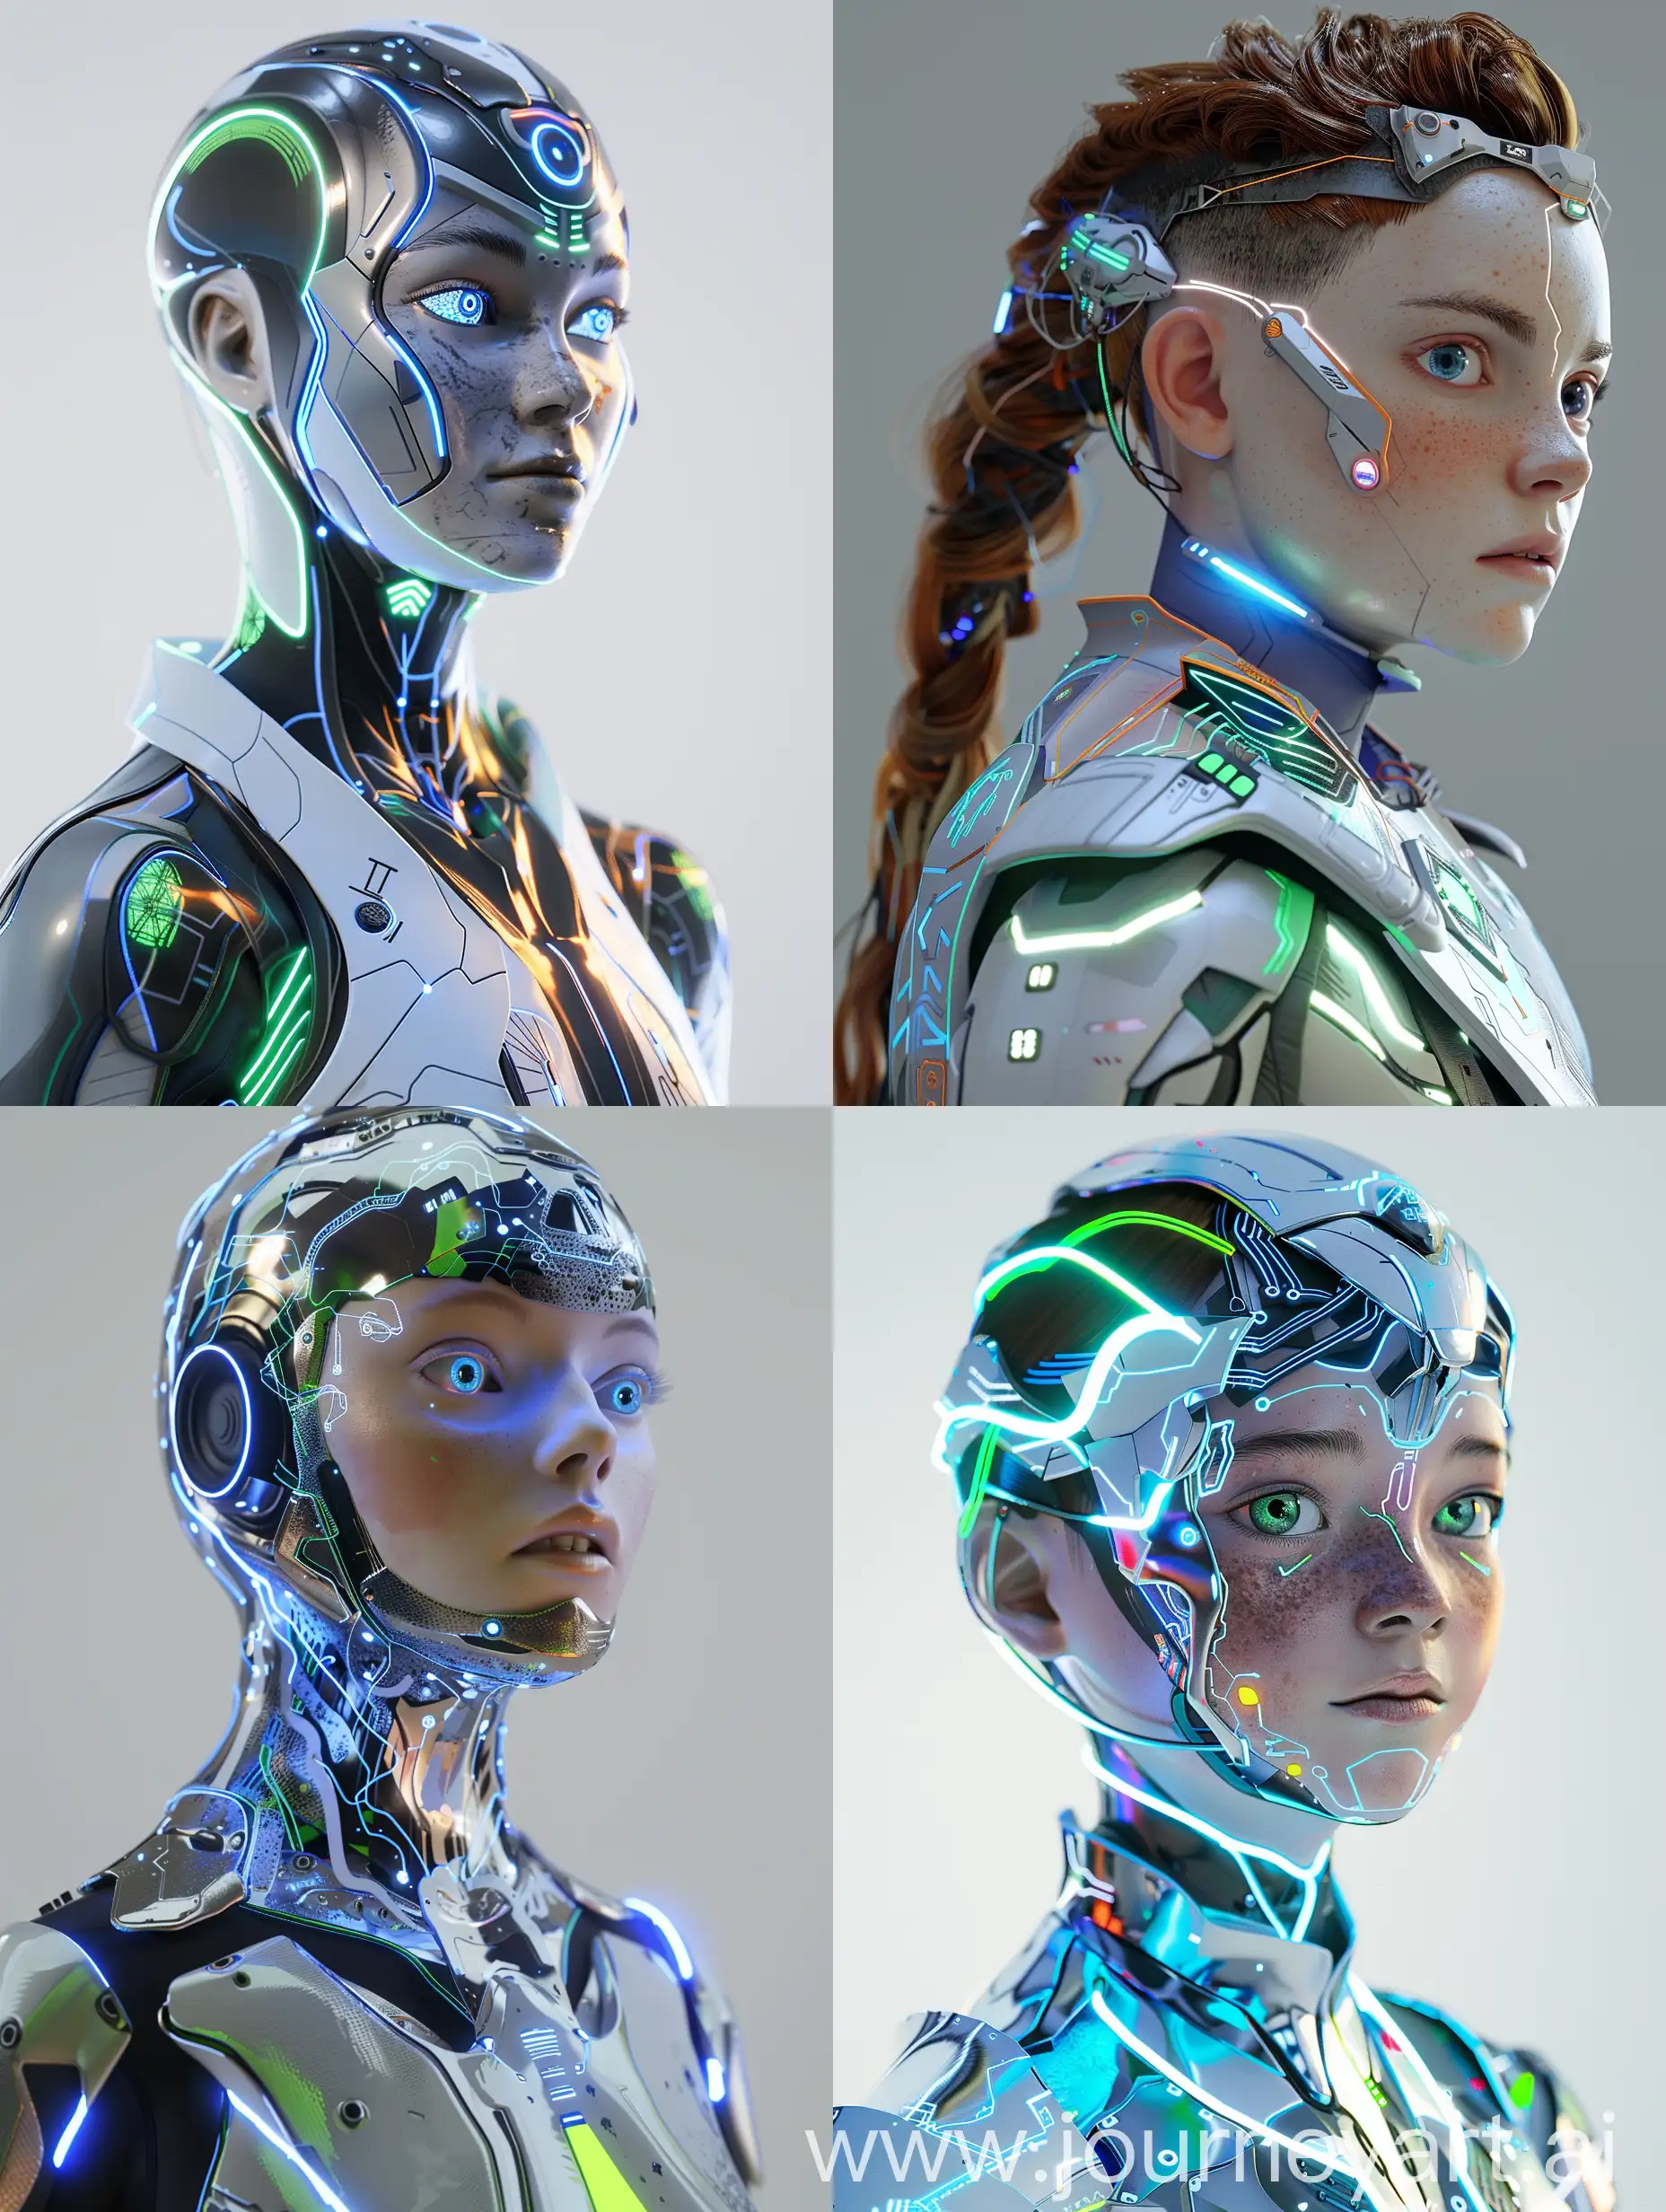 Futuristic-Androgynous-Character-Aurora-Timeless-Wisdom-and-Youth-in-Metallic-Silver-and-Neon-Blue